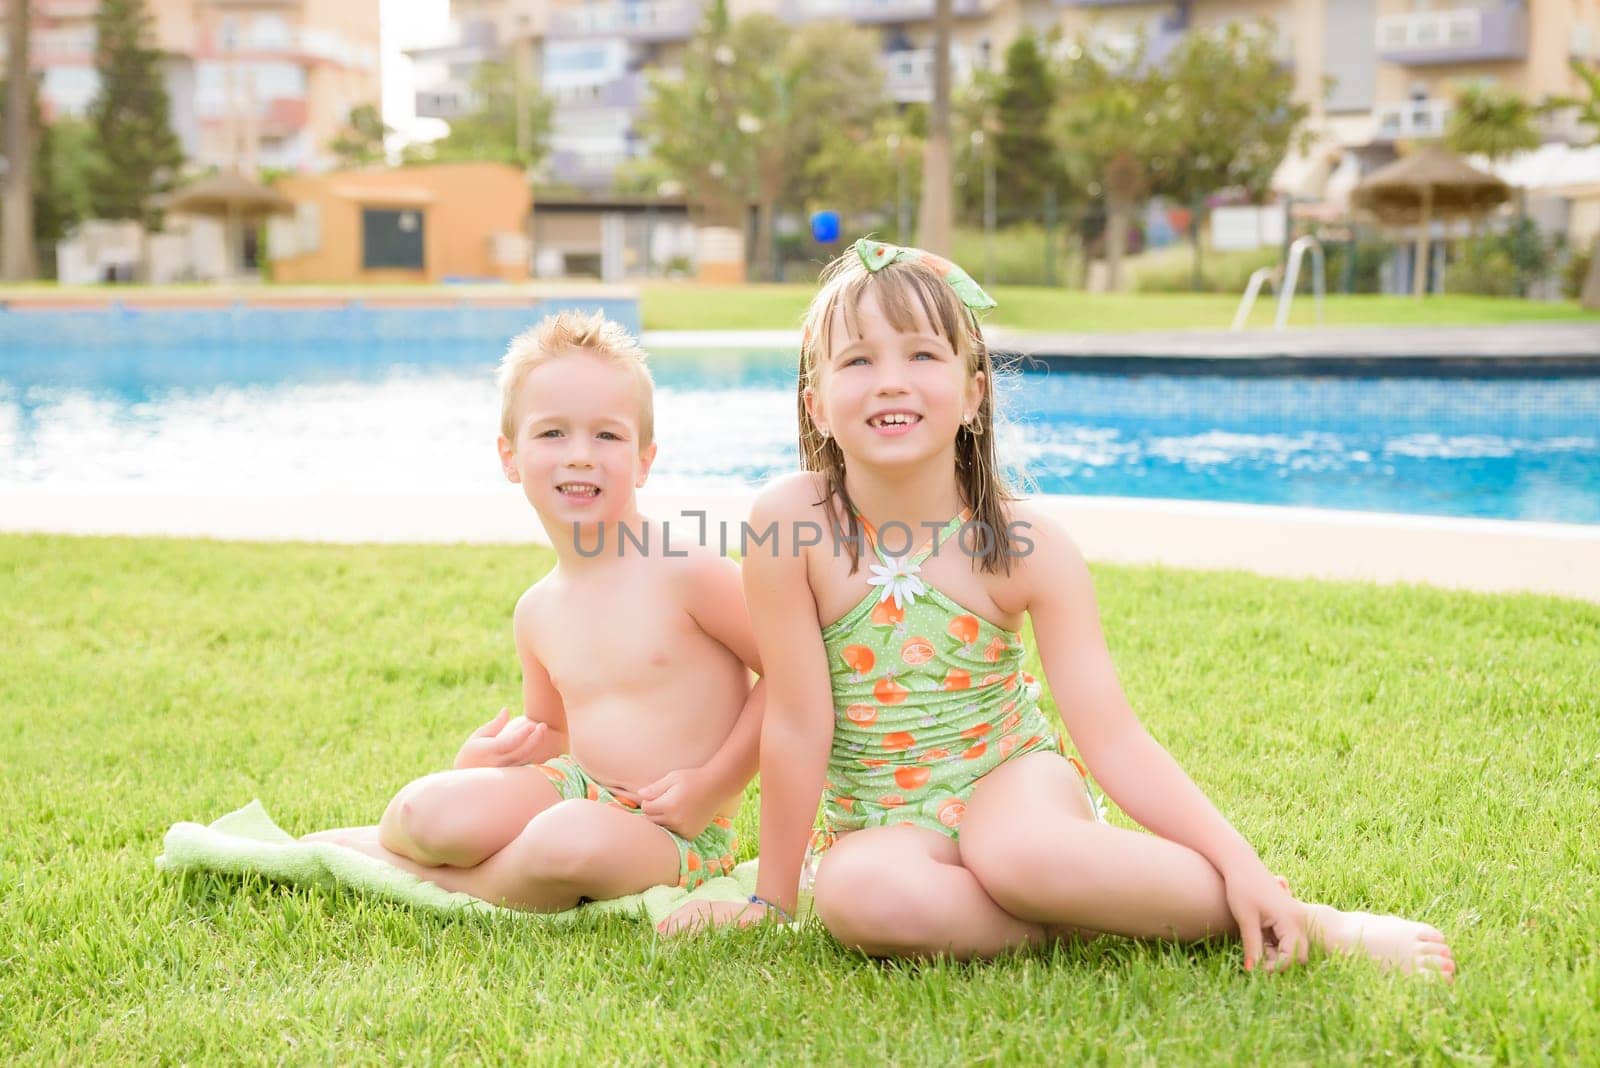 Theme is a children's summer vacation. Two Caucasian children, brother and sister, sit in a perched round pool with water in the yard of the green grass in a bathing suit and joy happiness smile. by jcdiazhidalgo